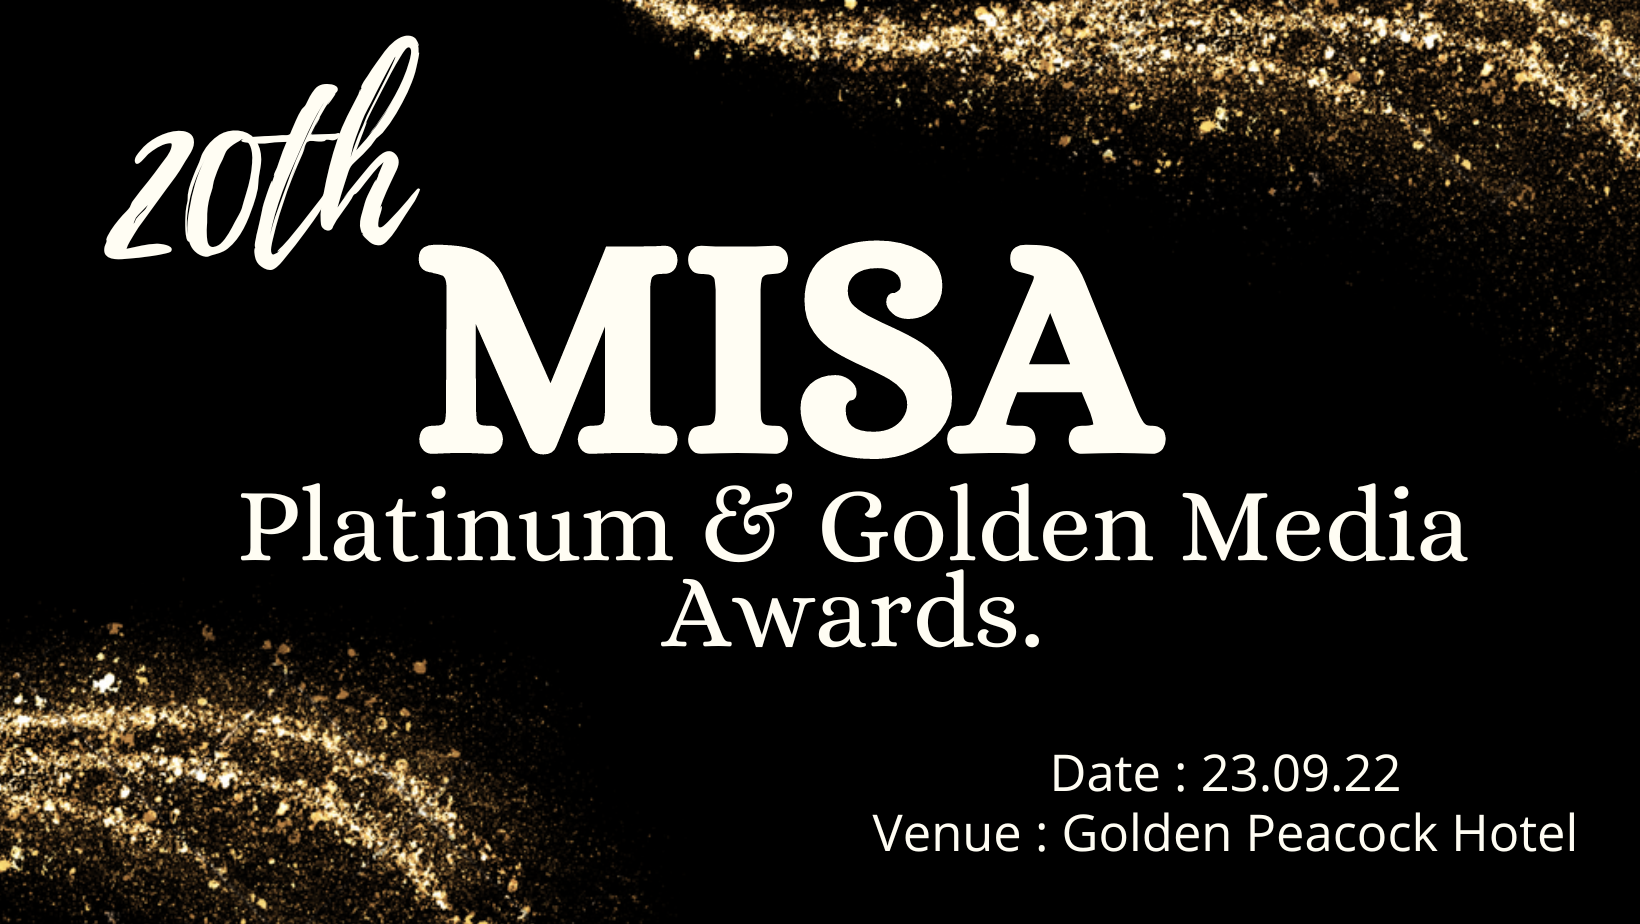 Call for entries towards the 20th MISA Zambia Platinum & Golden Awards